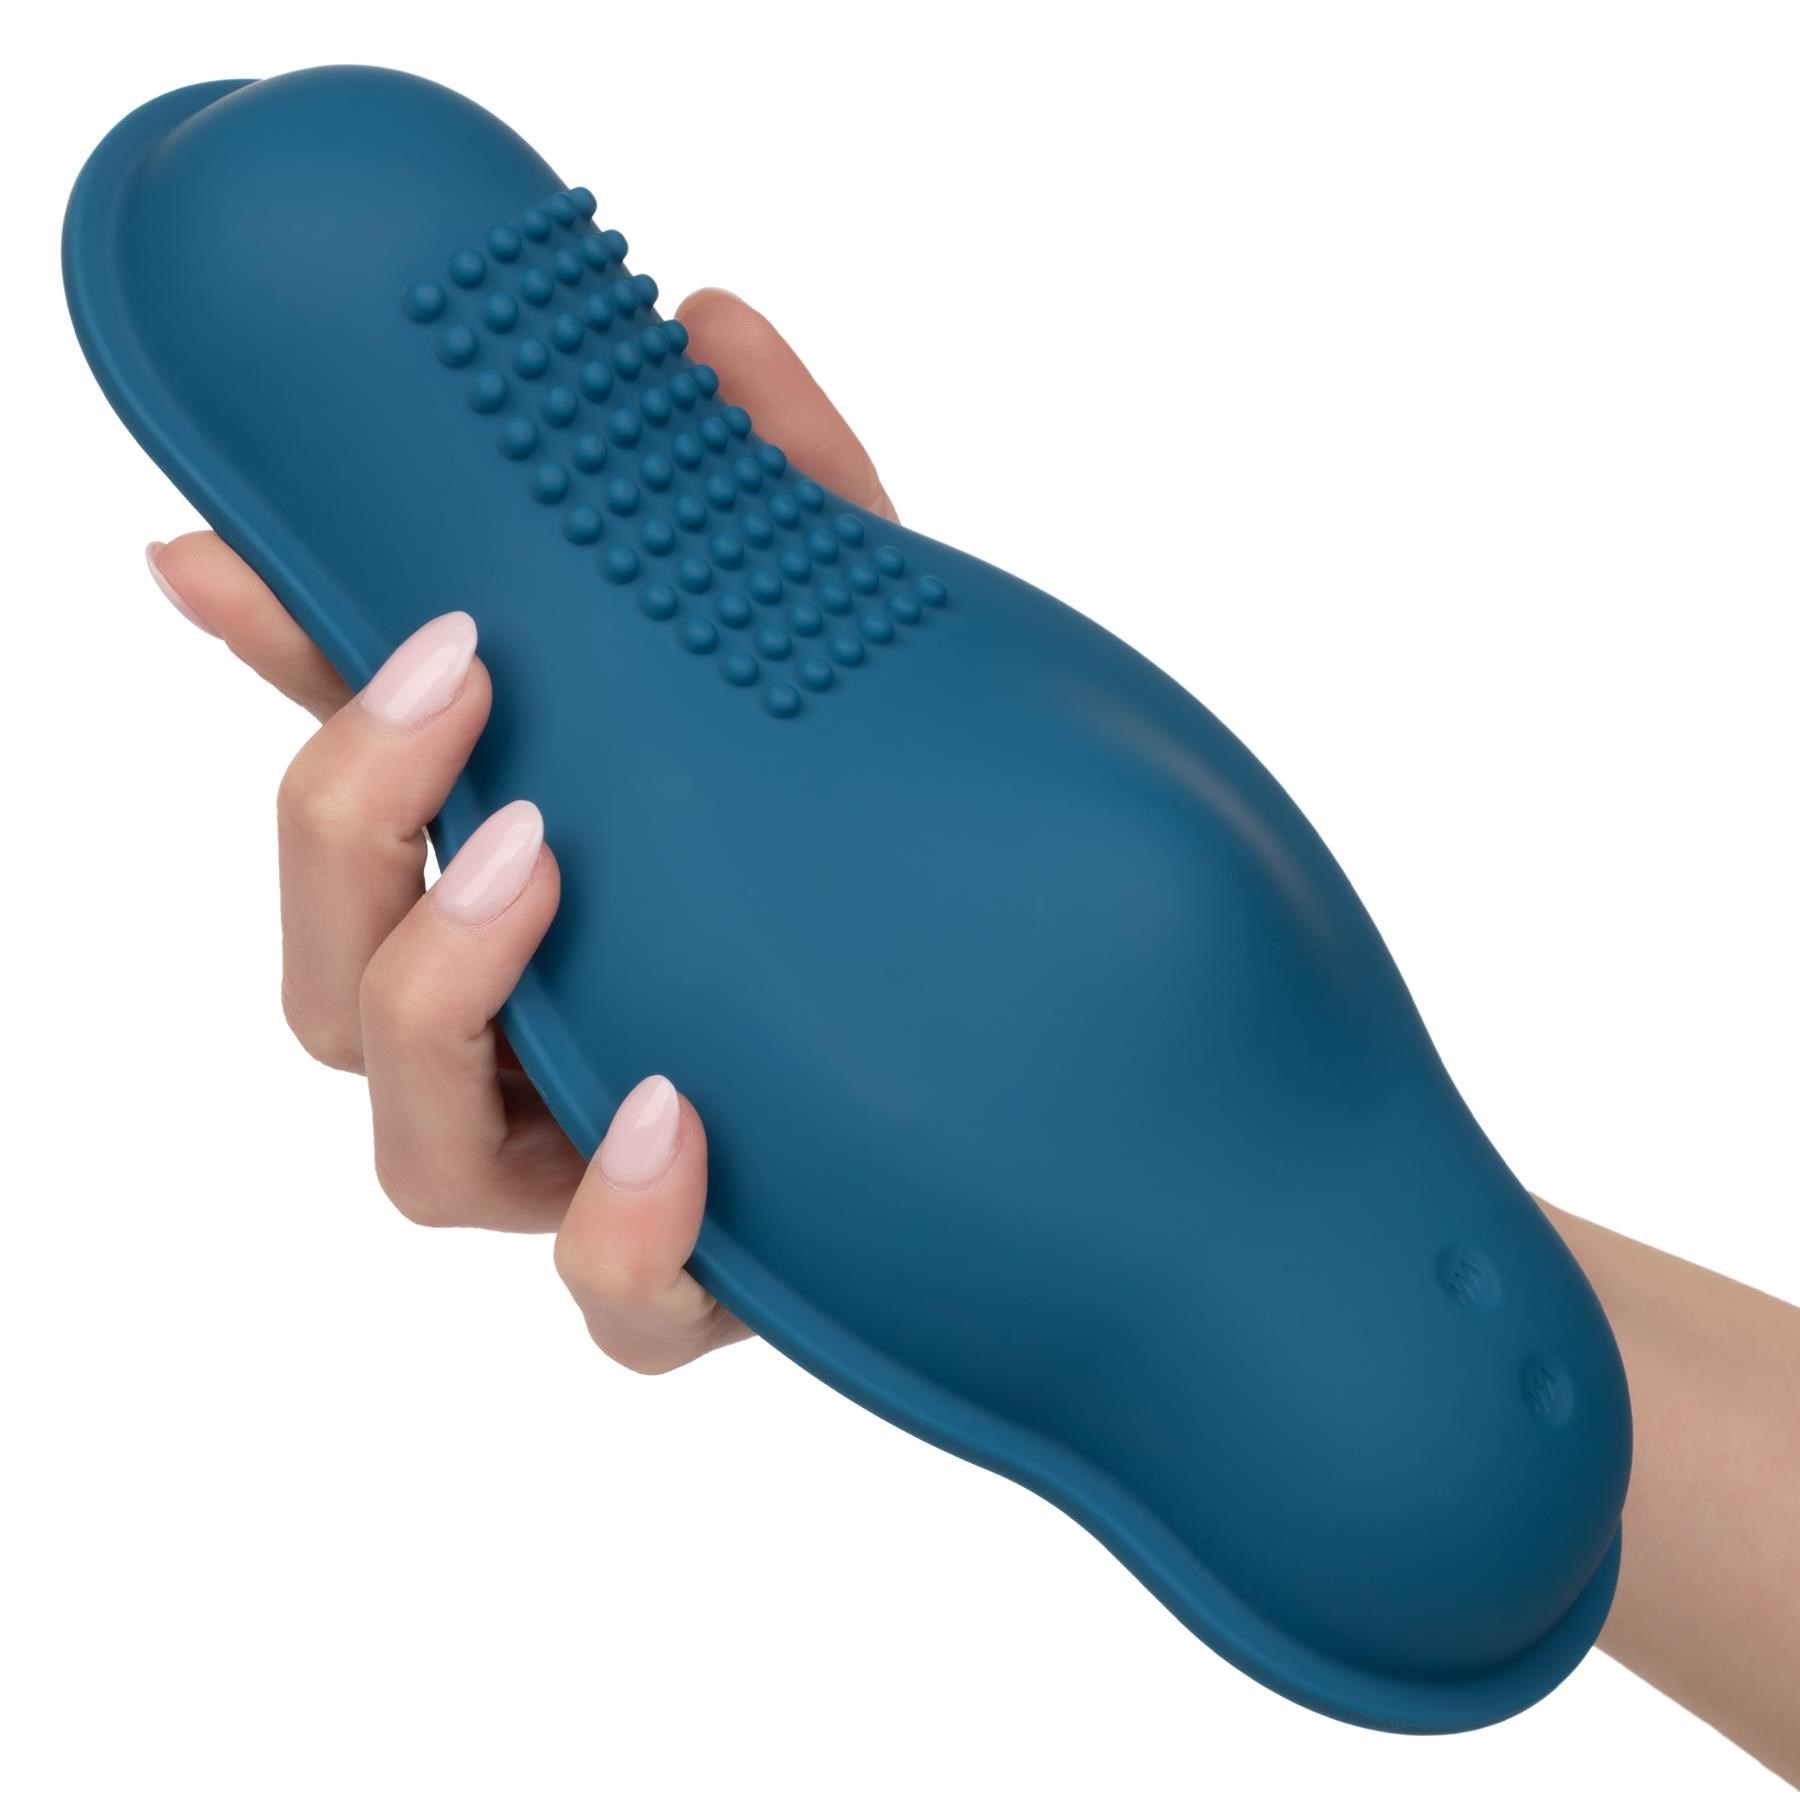 Dual Rider Bump And Grind Vibrator - Hand Shot - Product